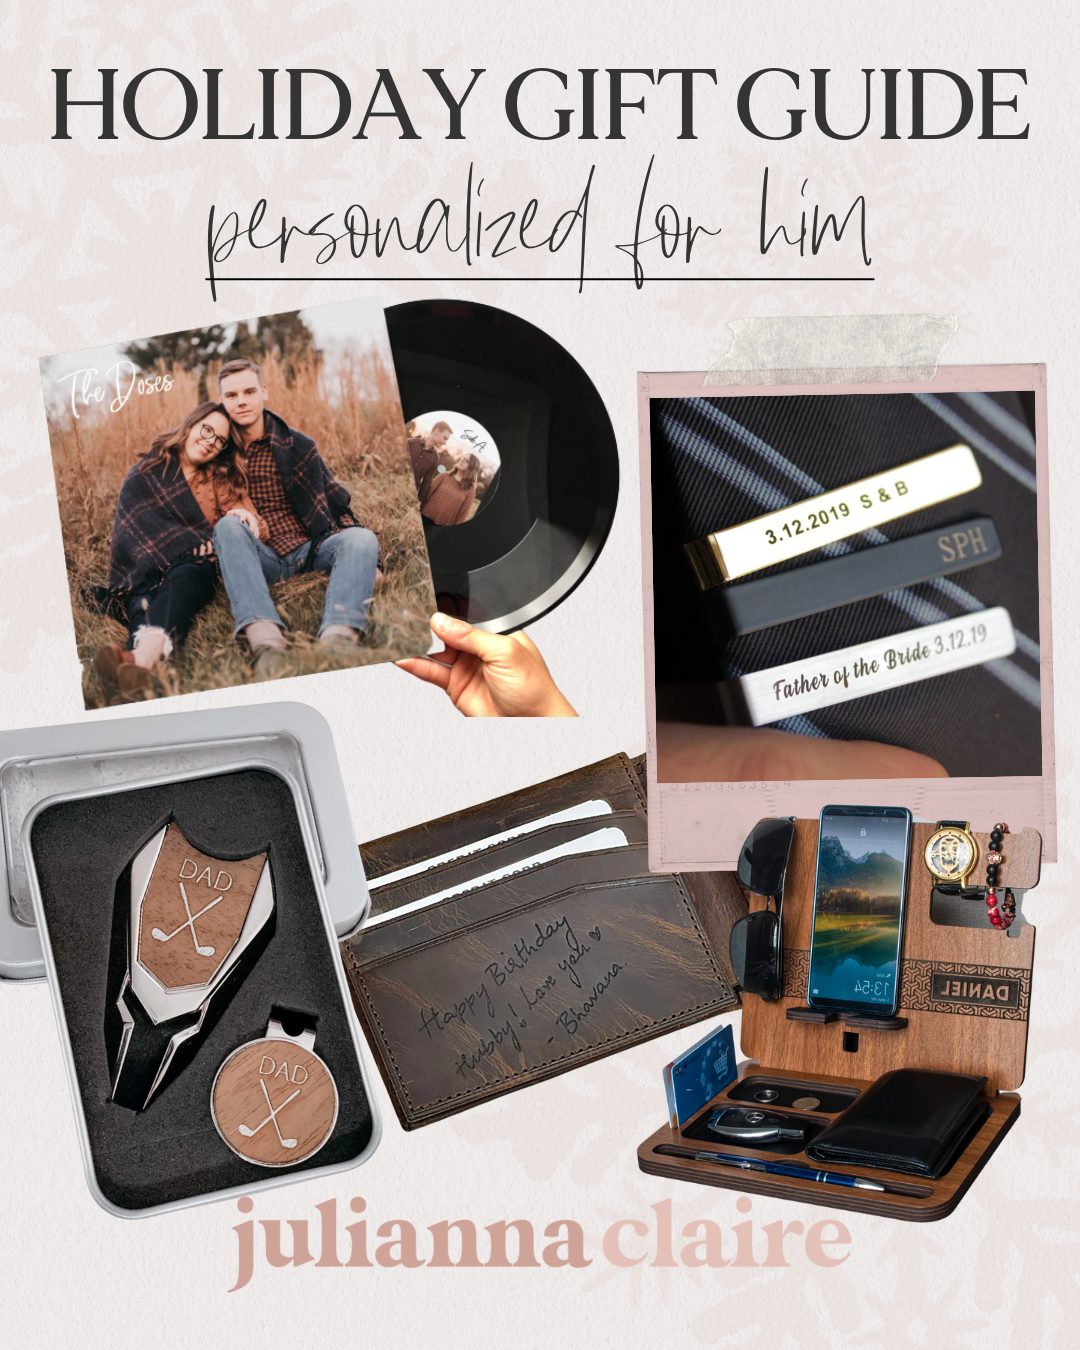 personalized gifts for him